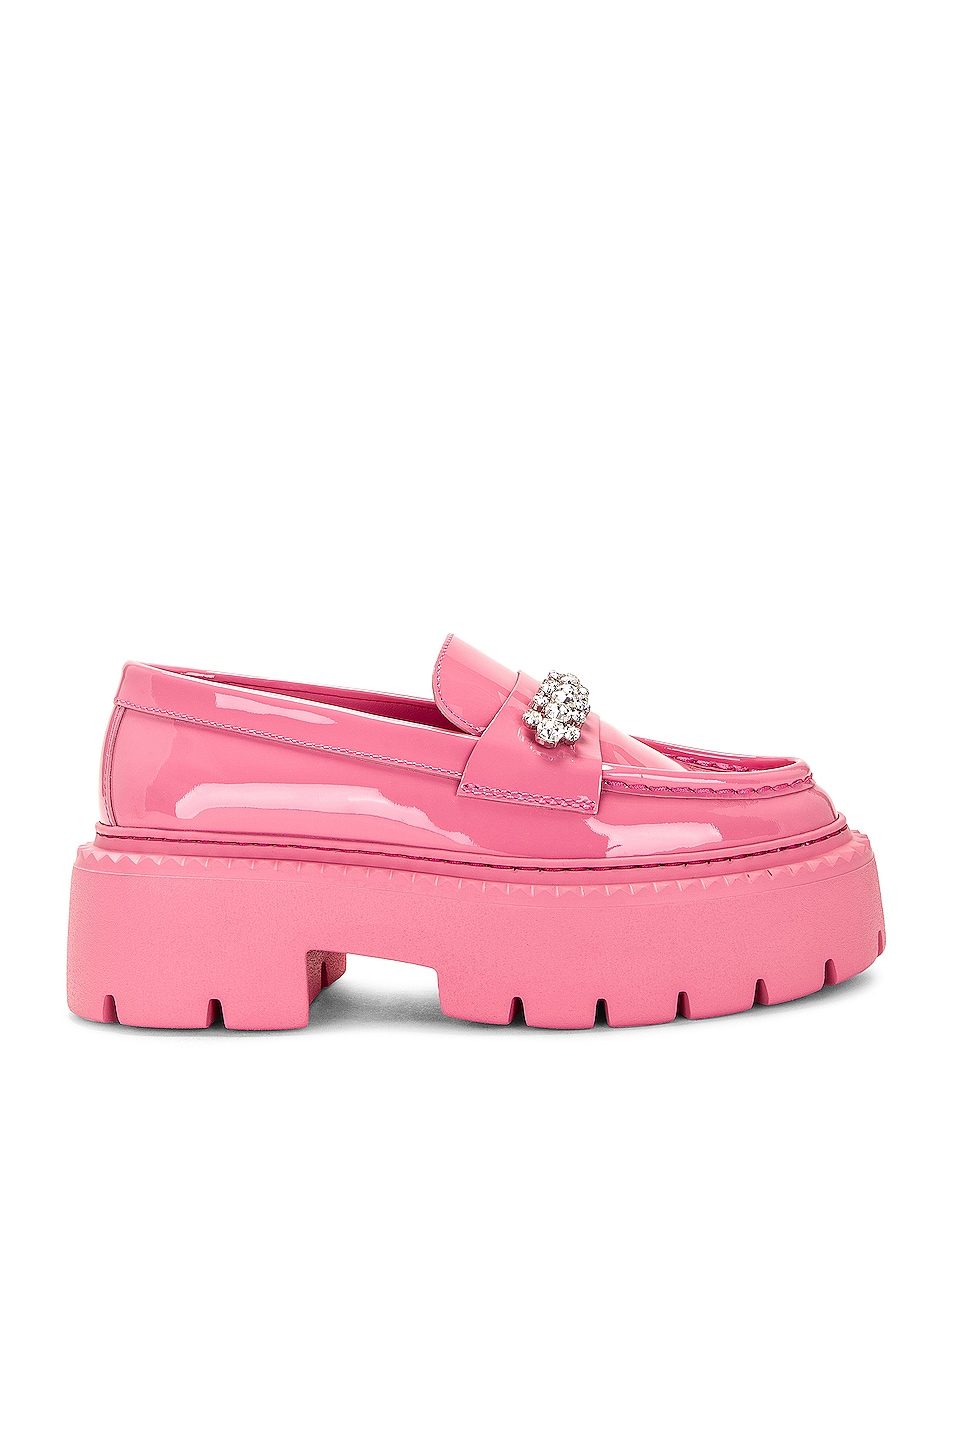 Image 1 of Jimmy Choo Bryer Flat Patent Leather Loafer in Candy Pink